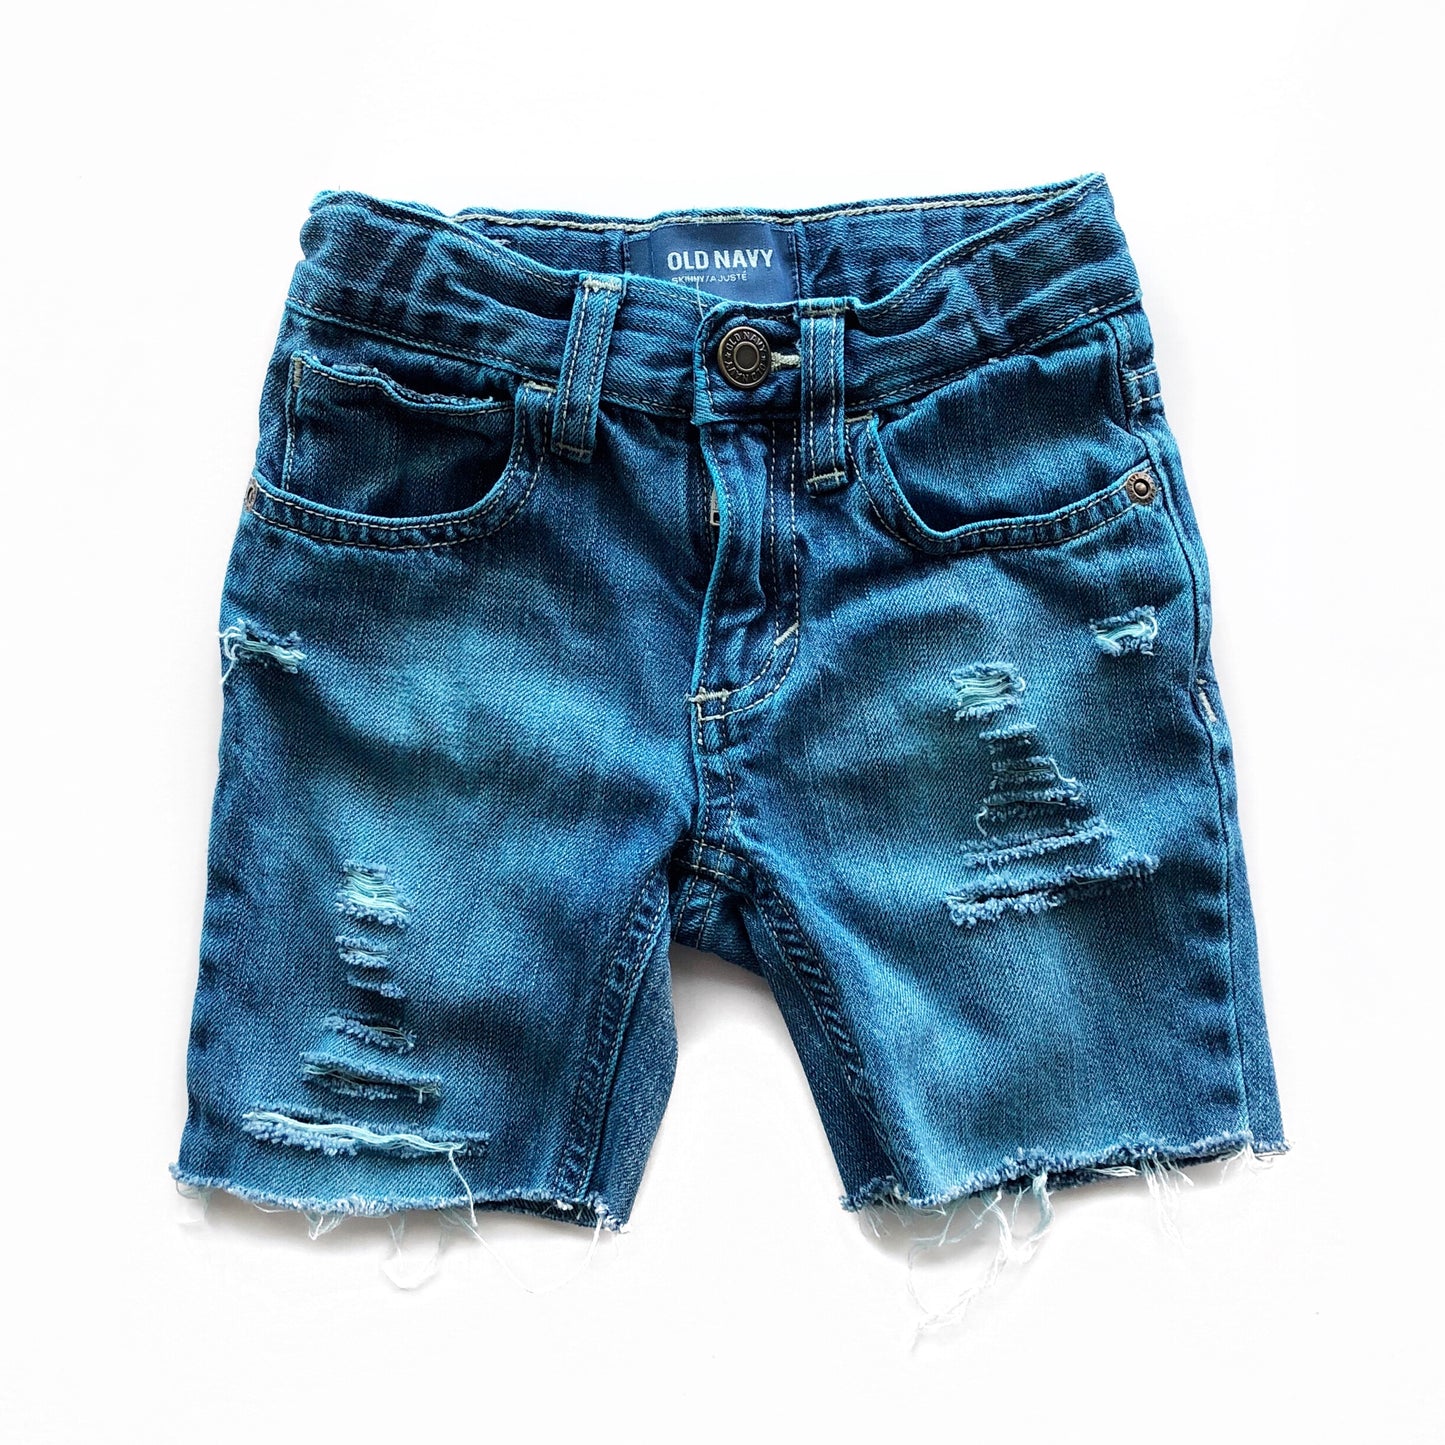 Sea Breeze Distressed and Dyed Skinny Cutoffs